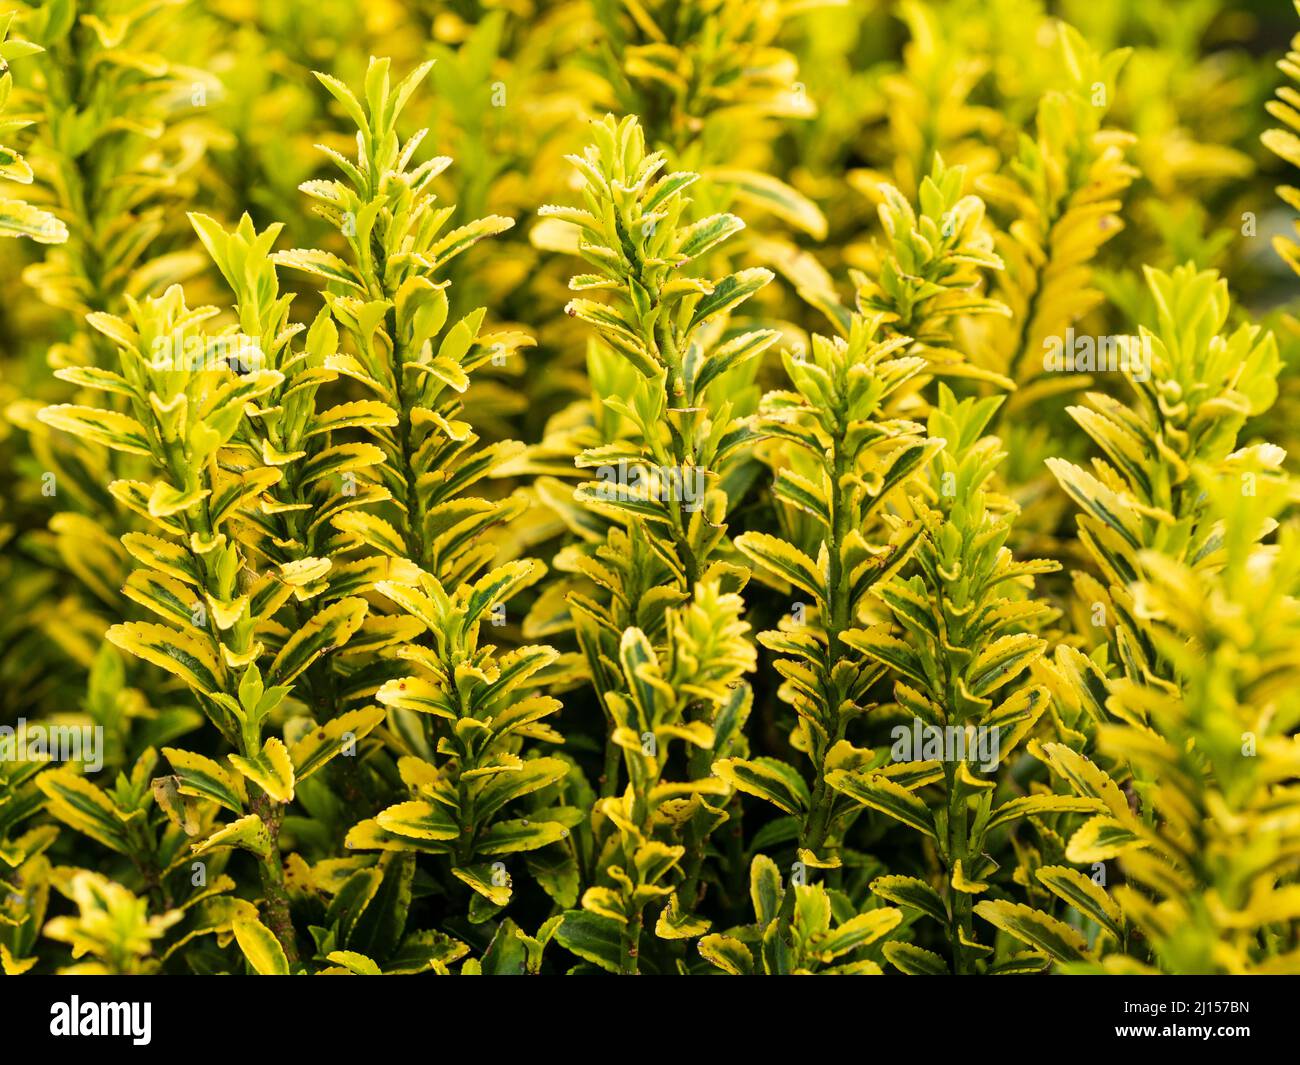 Vertical stems and yellow variegated evergreen leaves of the compact hardy shrub, Eunymus japonicus 'Microphyllus Pulchellus' Stock Photo